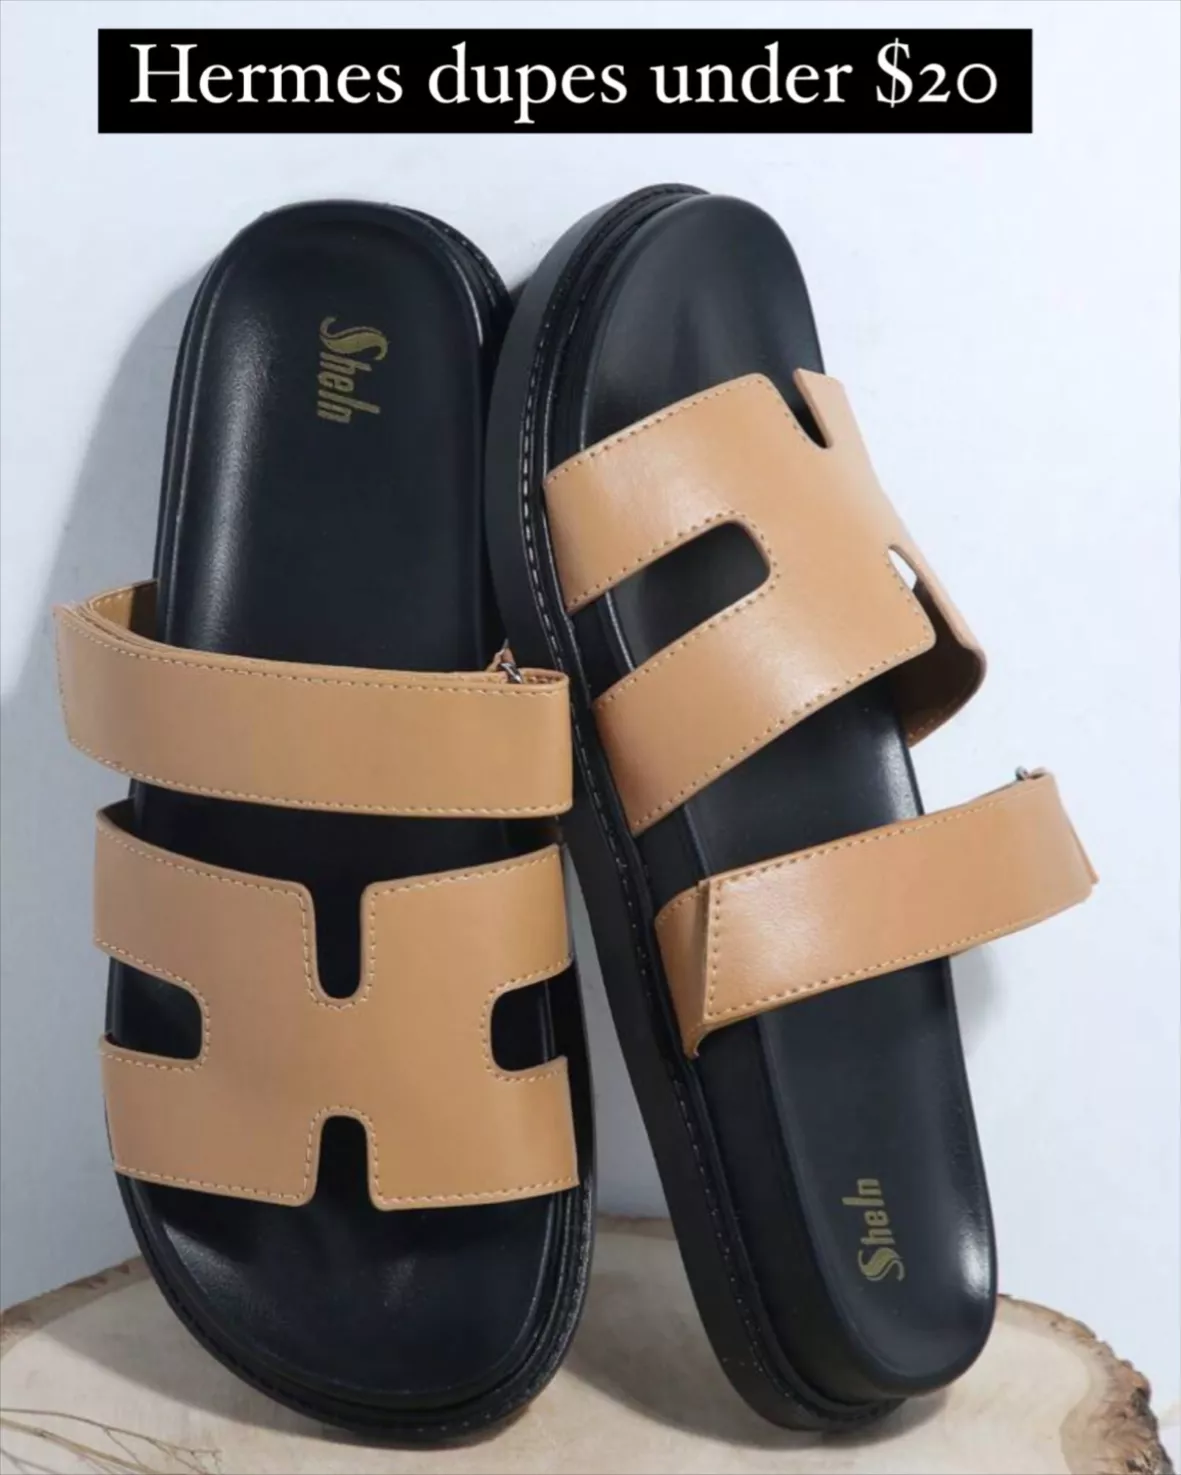 These Louis Vuitton Sandals Will Make You an Airport Style God